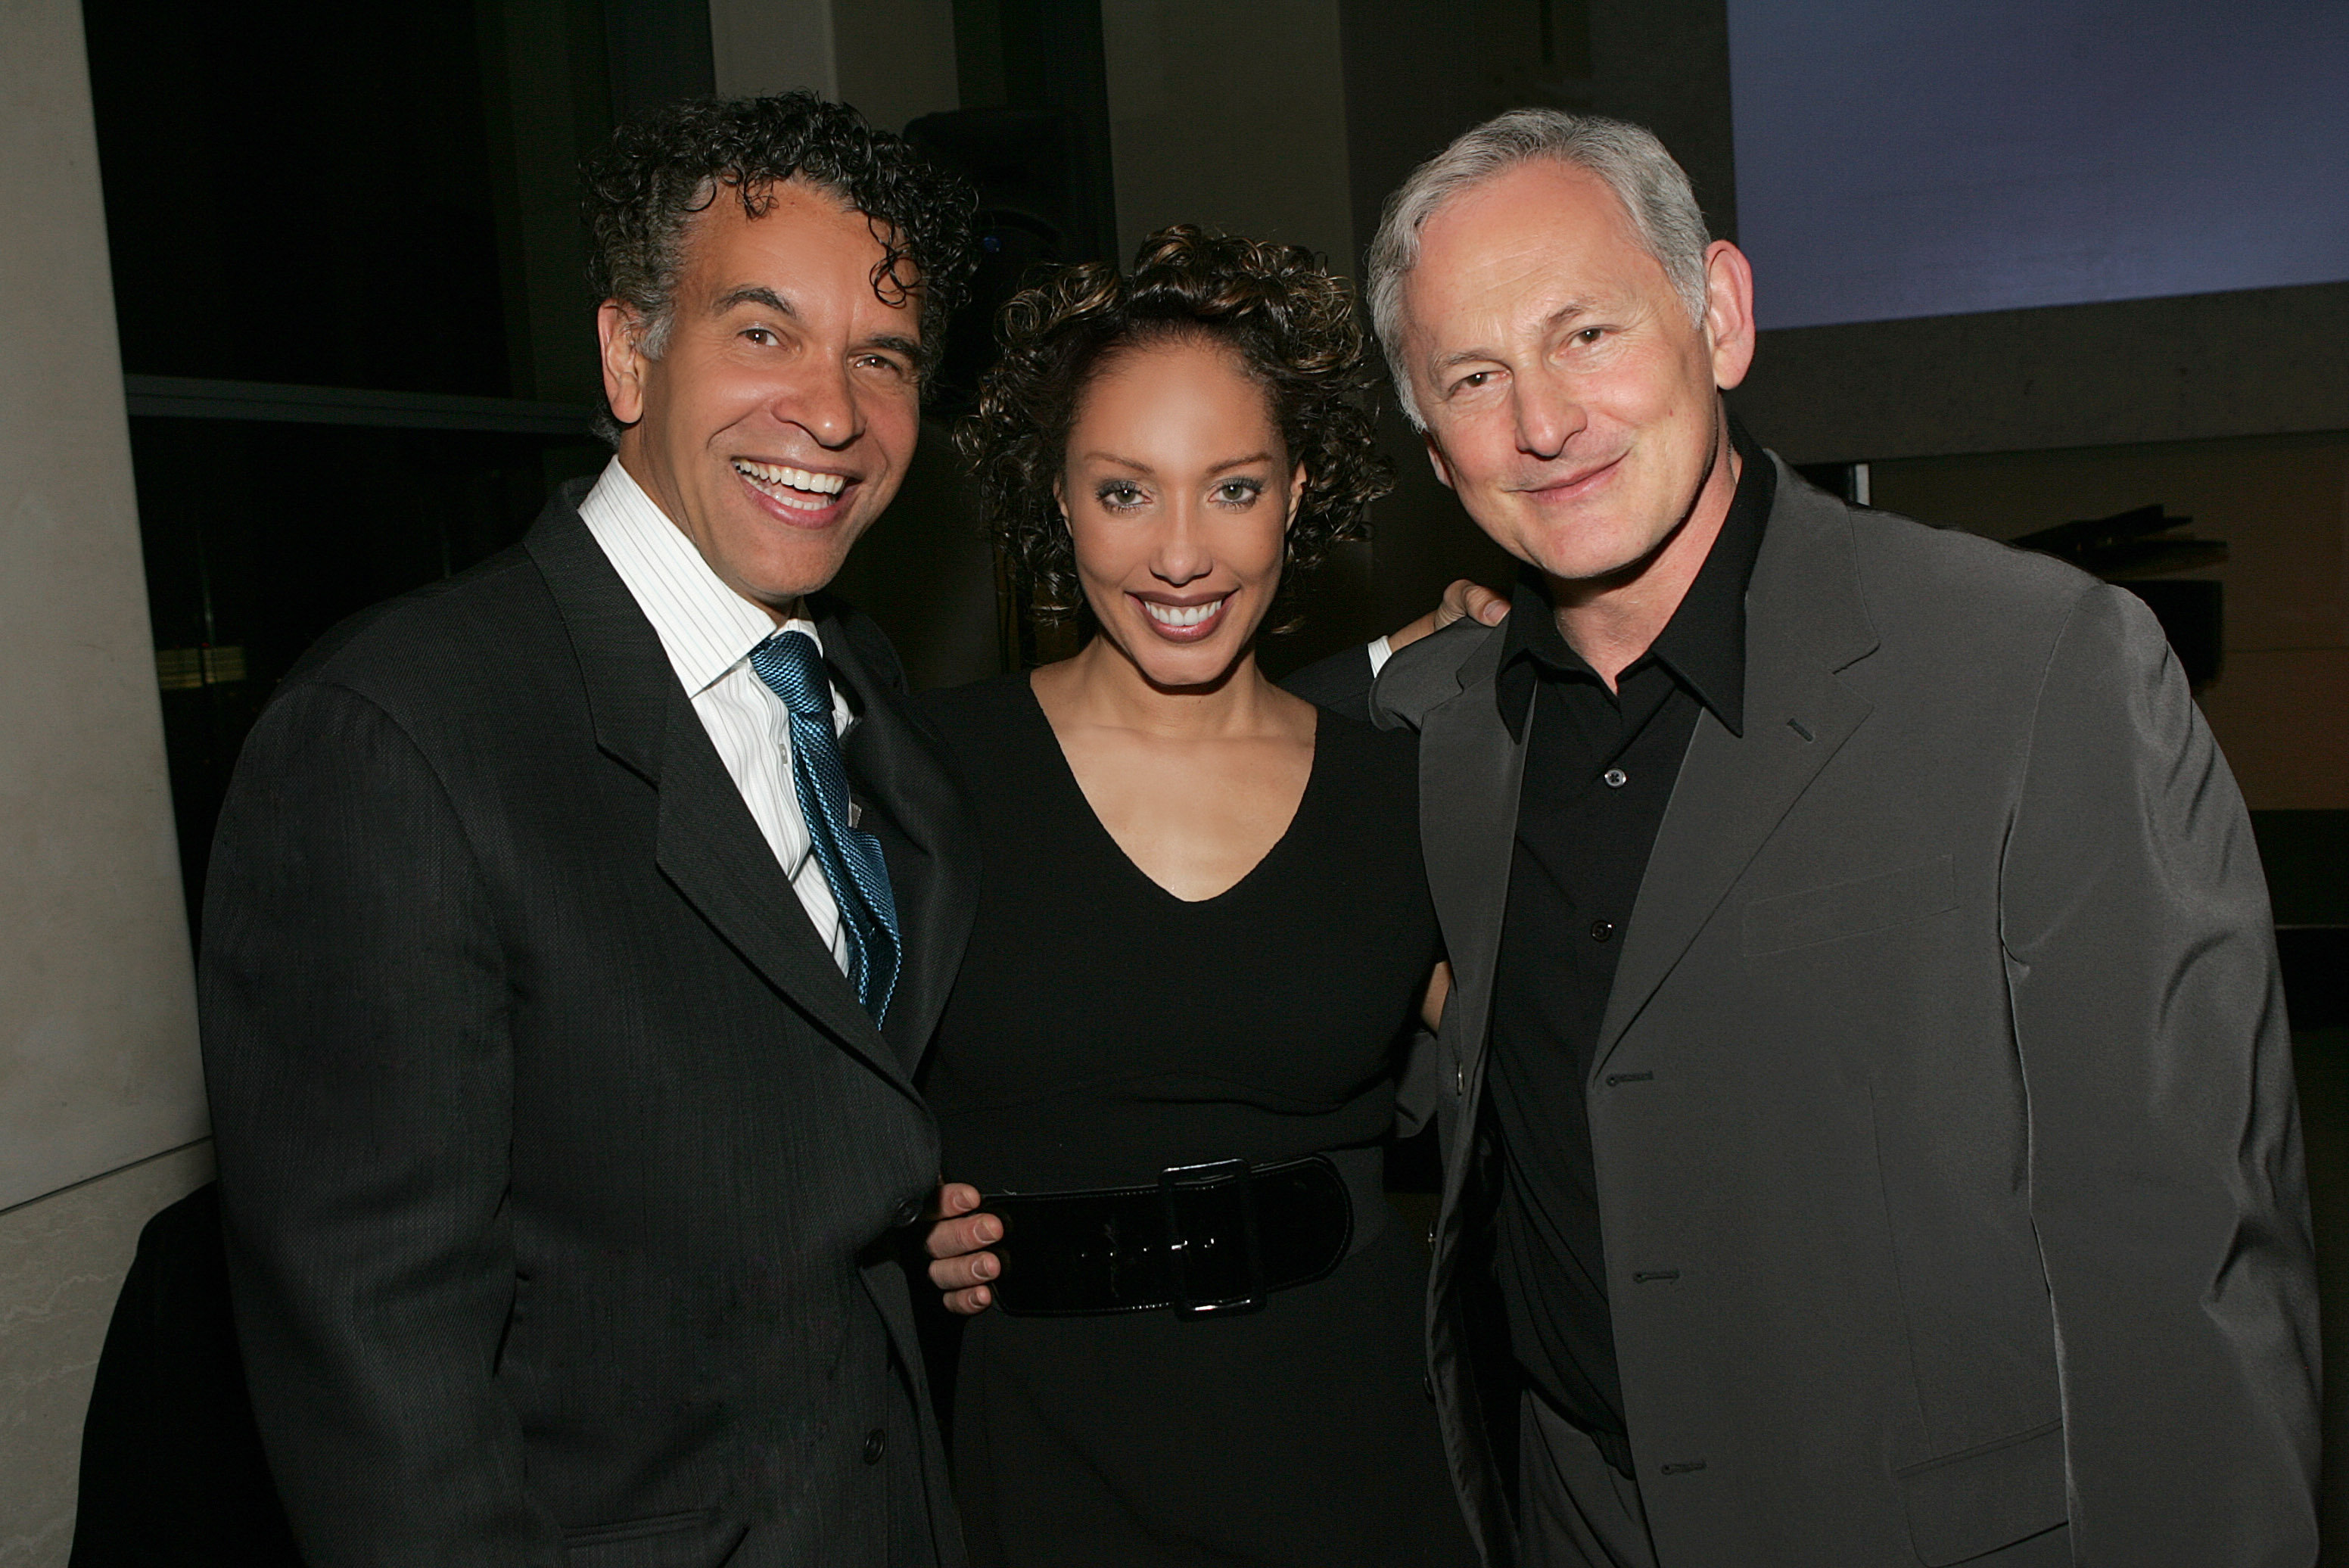 Joan Baker embraces (L) Brian Stokes Mitchell & (R) Victor Garber at the launch event 